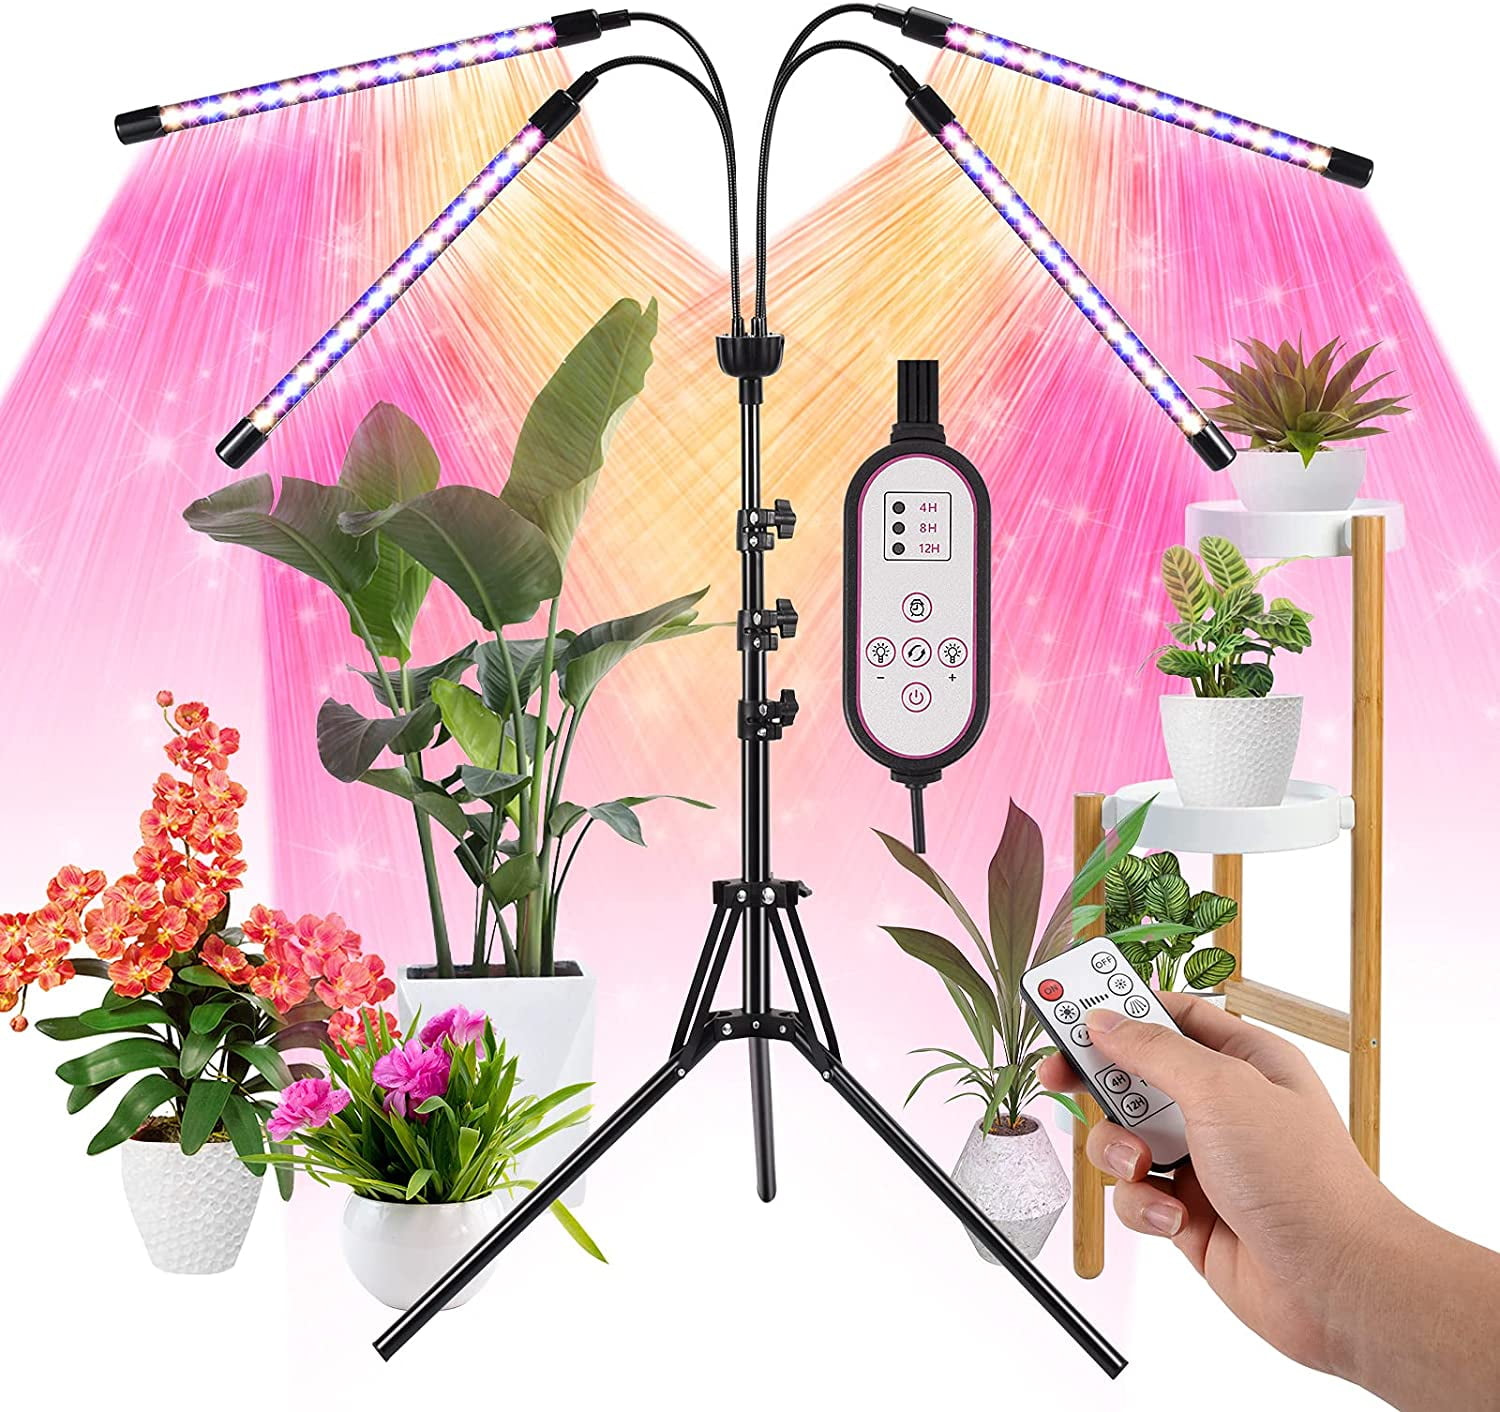 4-Heads LED Grow Lamp Light LED Grow Plant Lights For Indoor Plant Hydroponic 